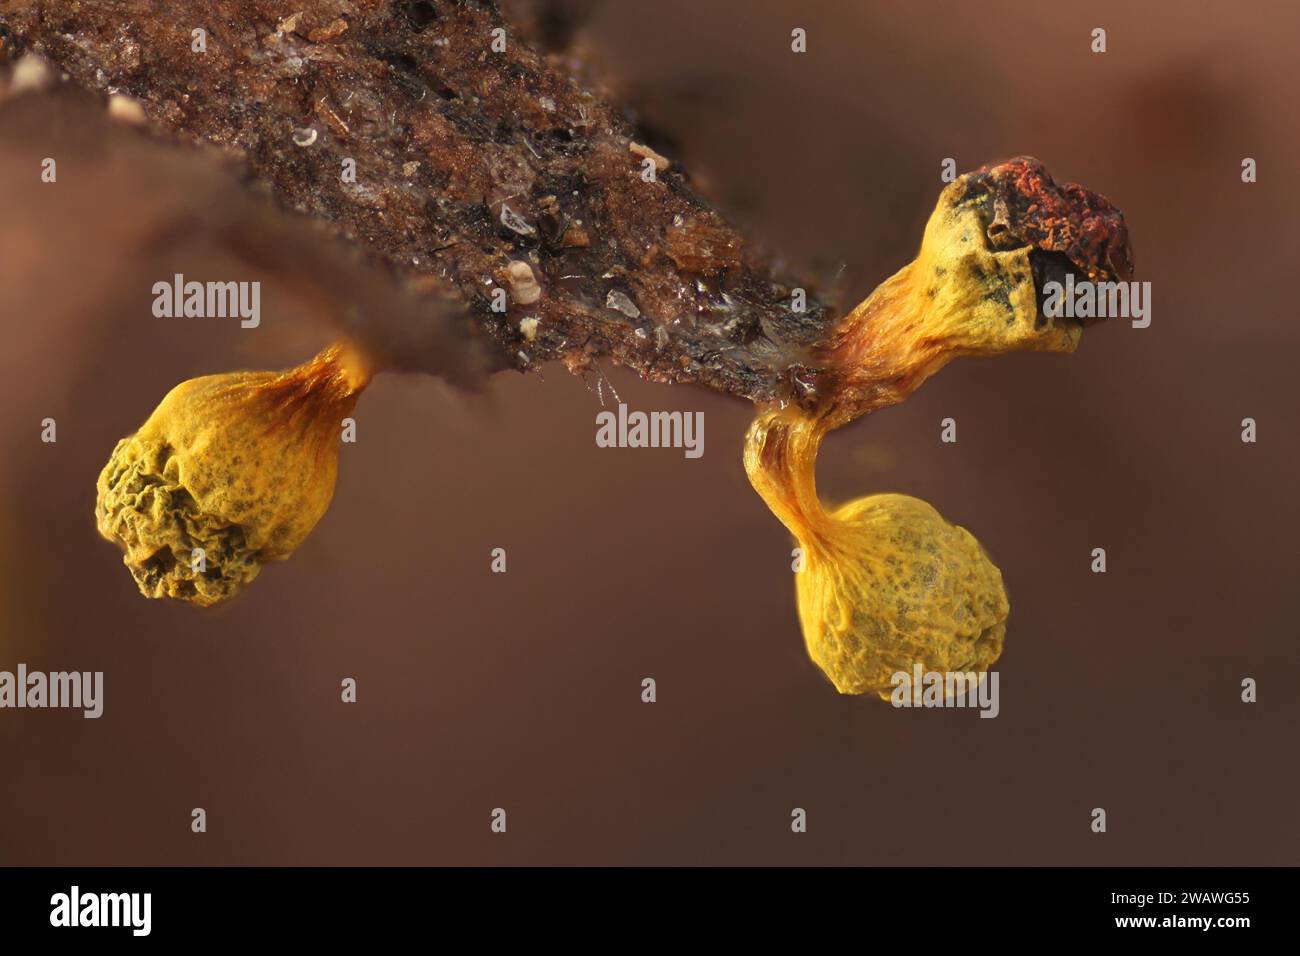 Craterium aureum, a slime mold from Finland, microscope image of sporocarp Stock Photo